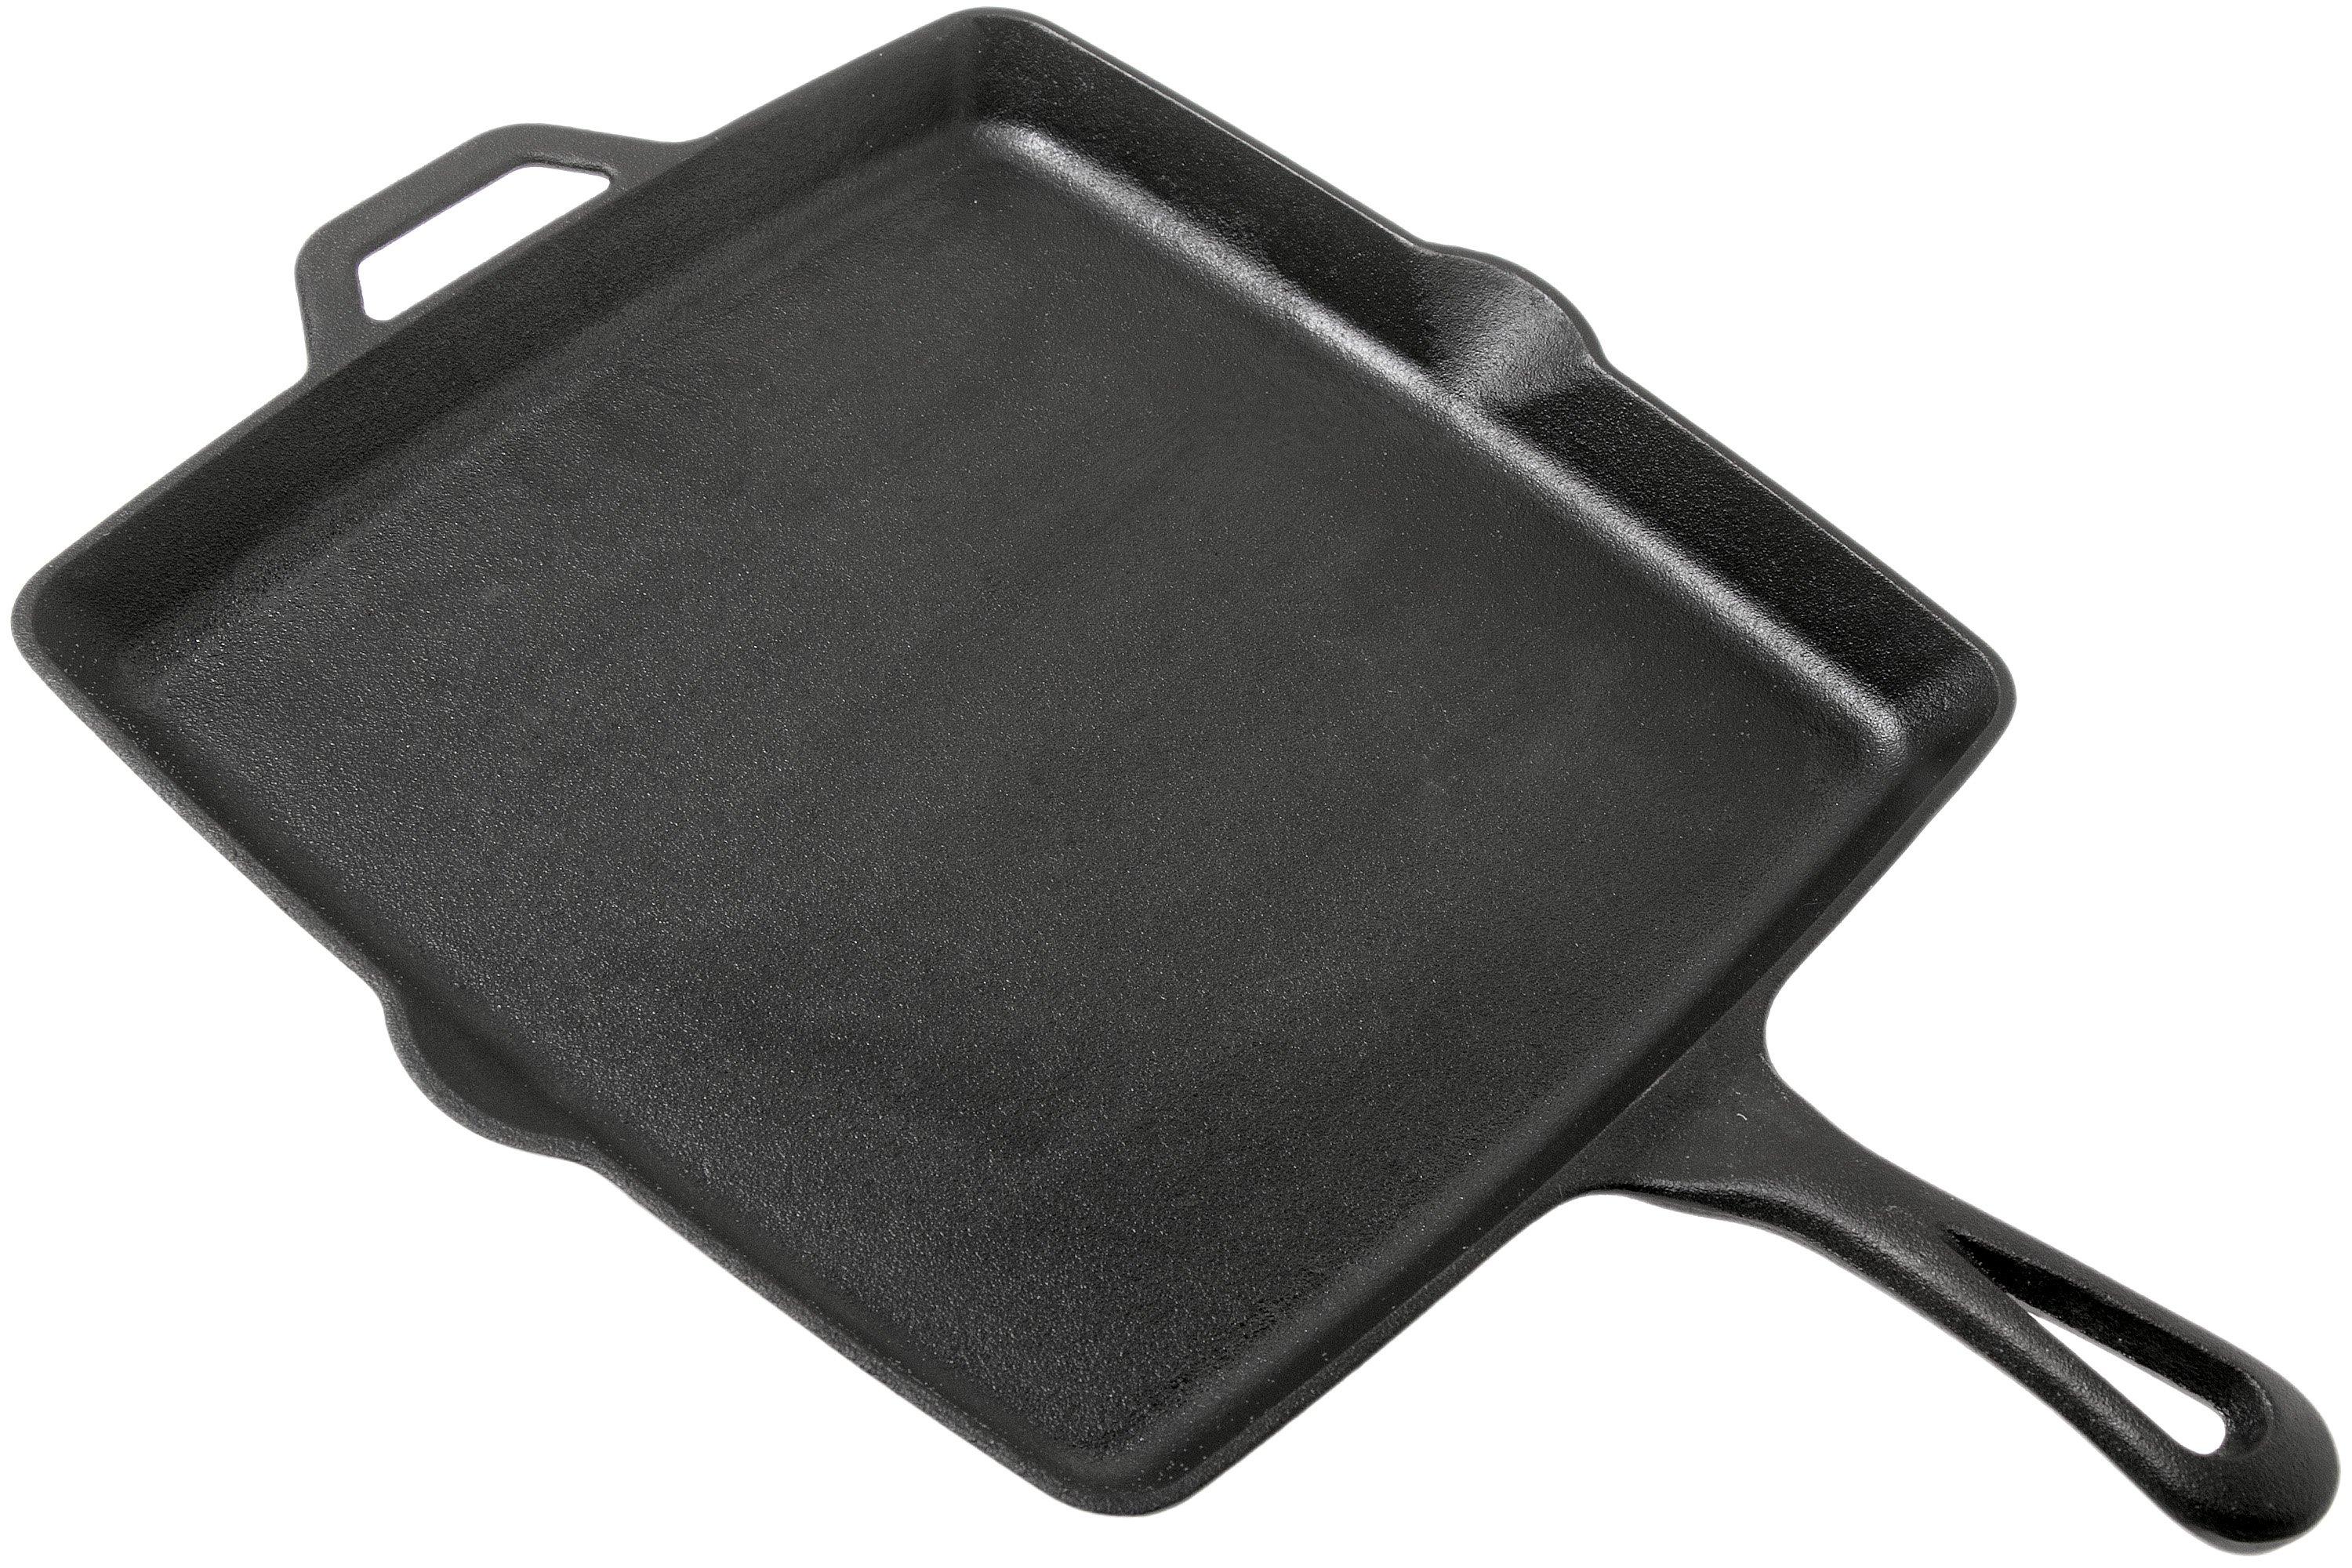 Camp Chef Square cast iron pan